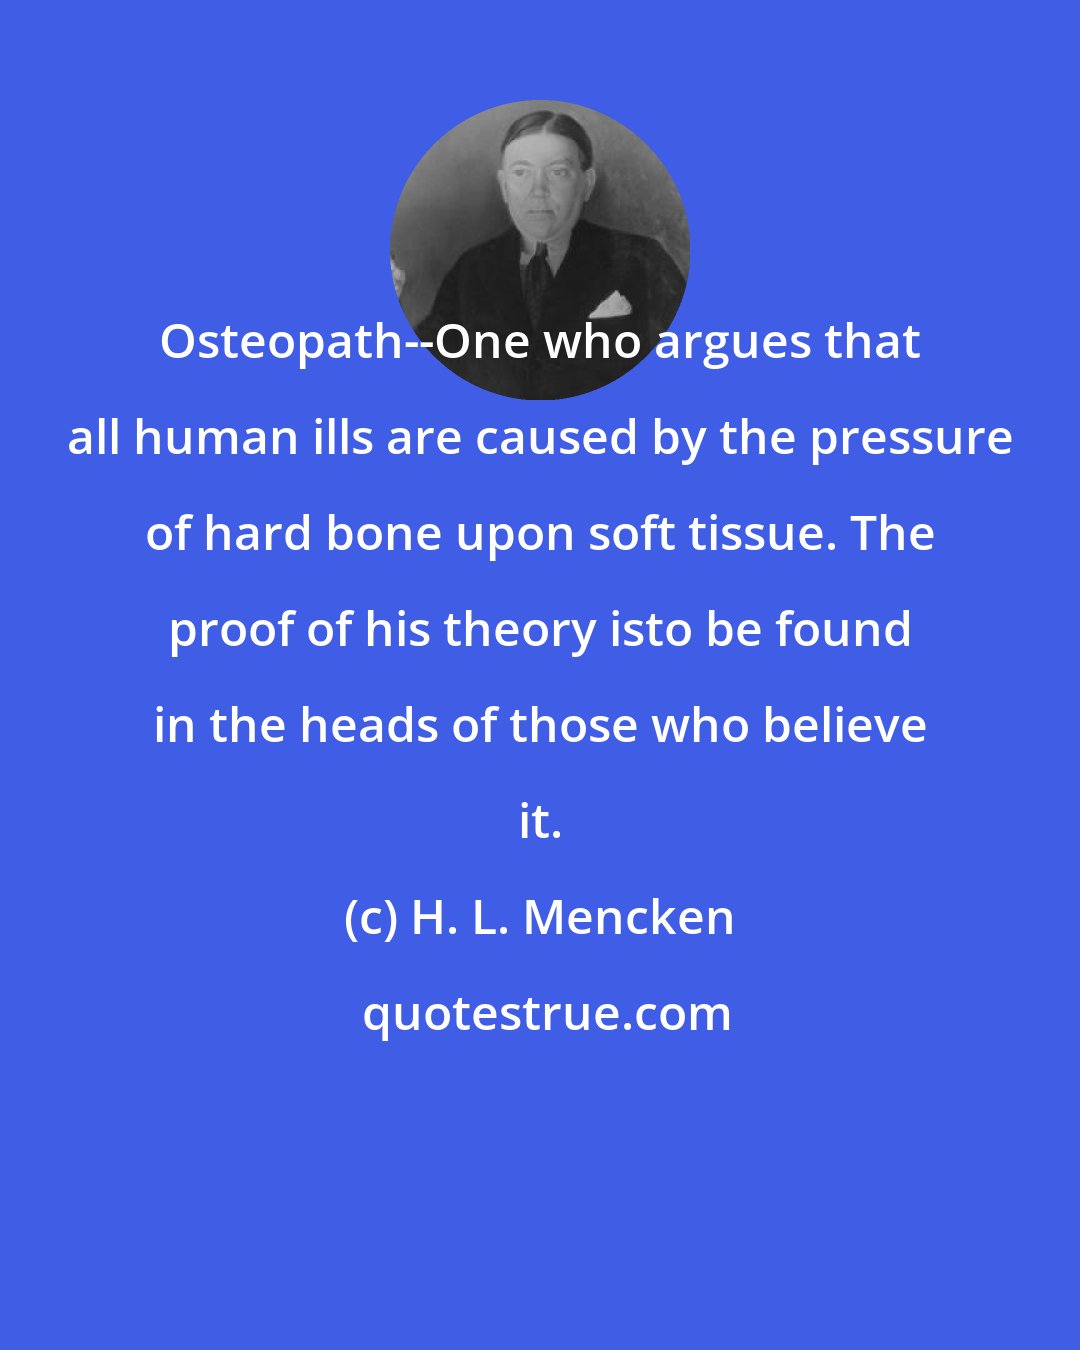 H. L. Mencken: Osteopath--One who argues that all human ills are caused by the pressure of hard bone upon soft tissue. The proof of his theory isto be found in the heads of those who believe it.